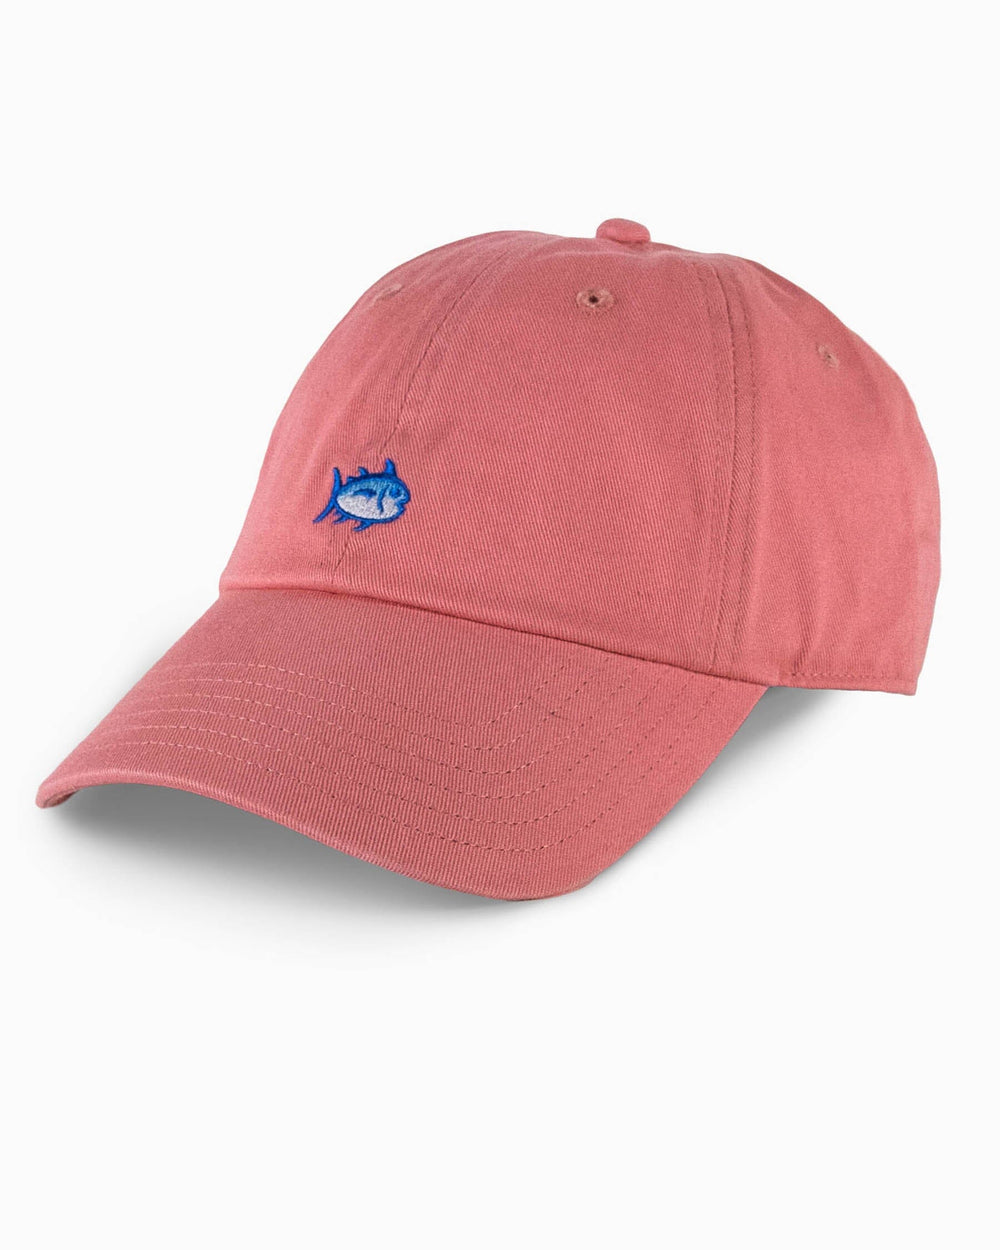 https://southerntide.com/cdn/shop/products/mini-skipjack-leather-strap-hat-conch-shell-front-7356.jpg?v=1705071512&width=1000